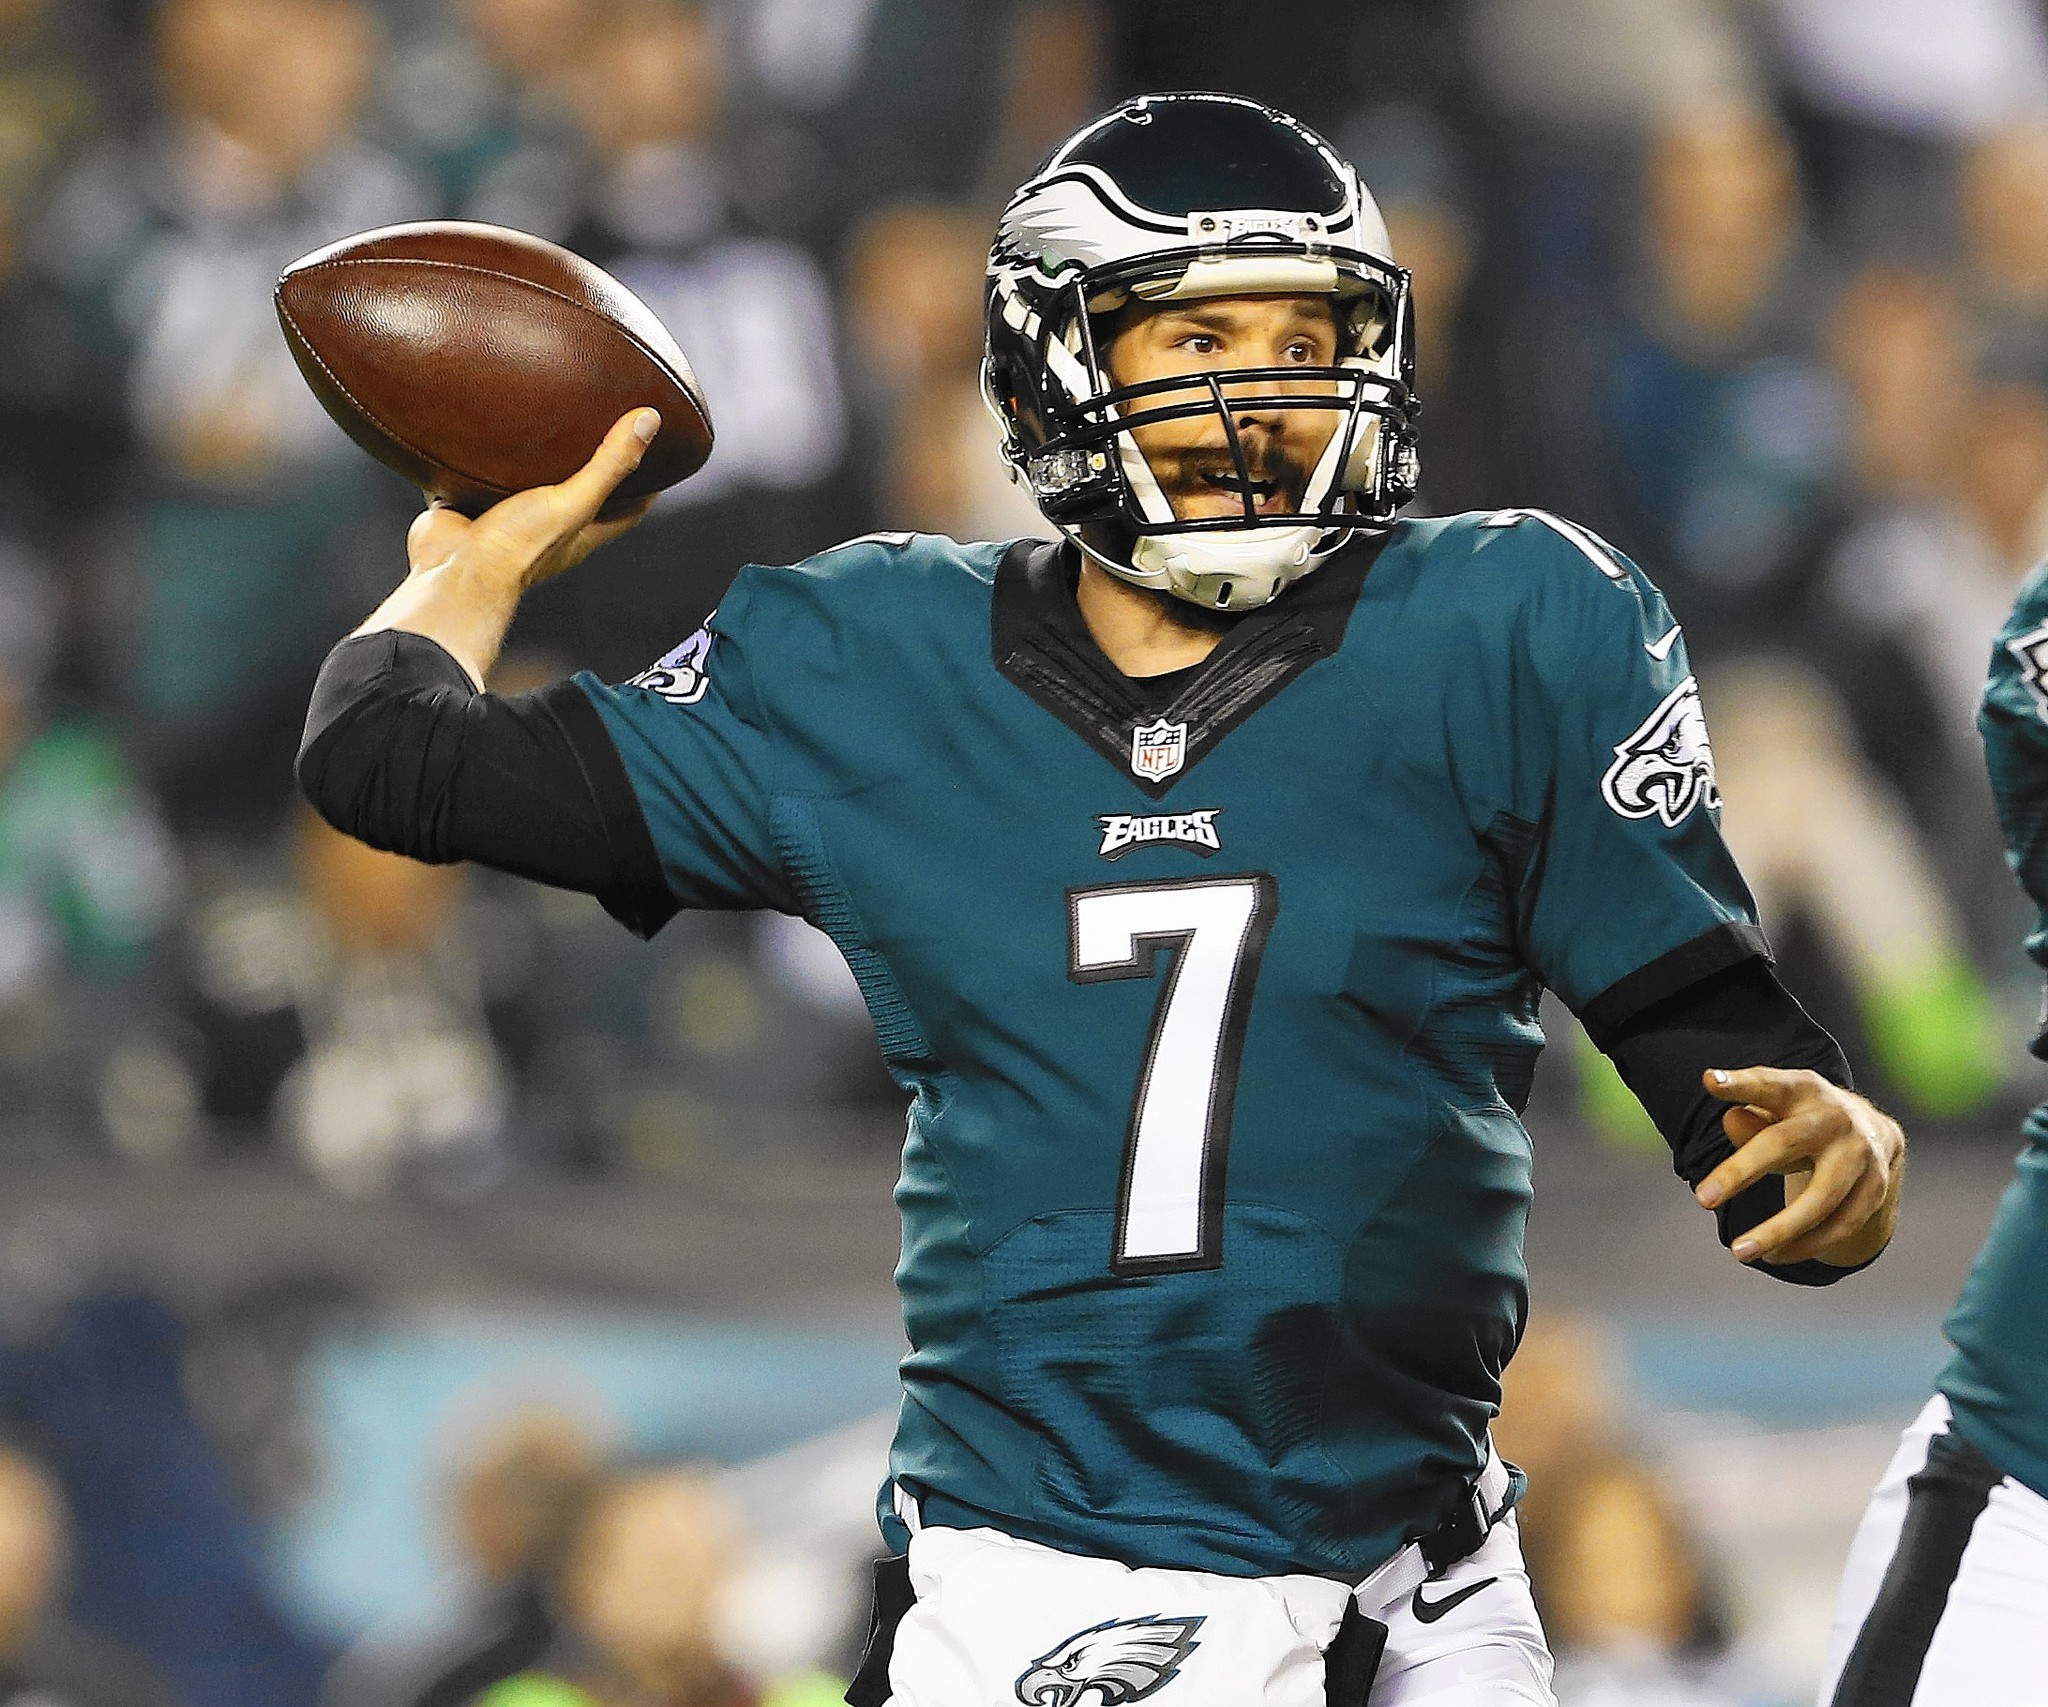 Is Sam Bradford the long-term answer at quarterback for the Eagles? - The Morning Call2048 x 1707